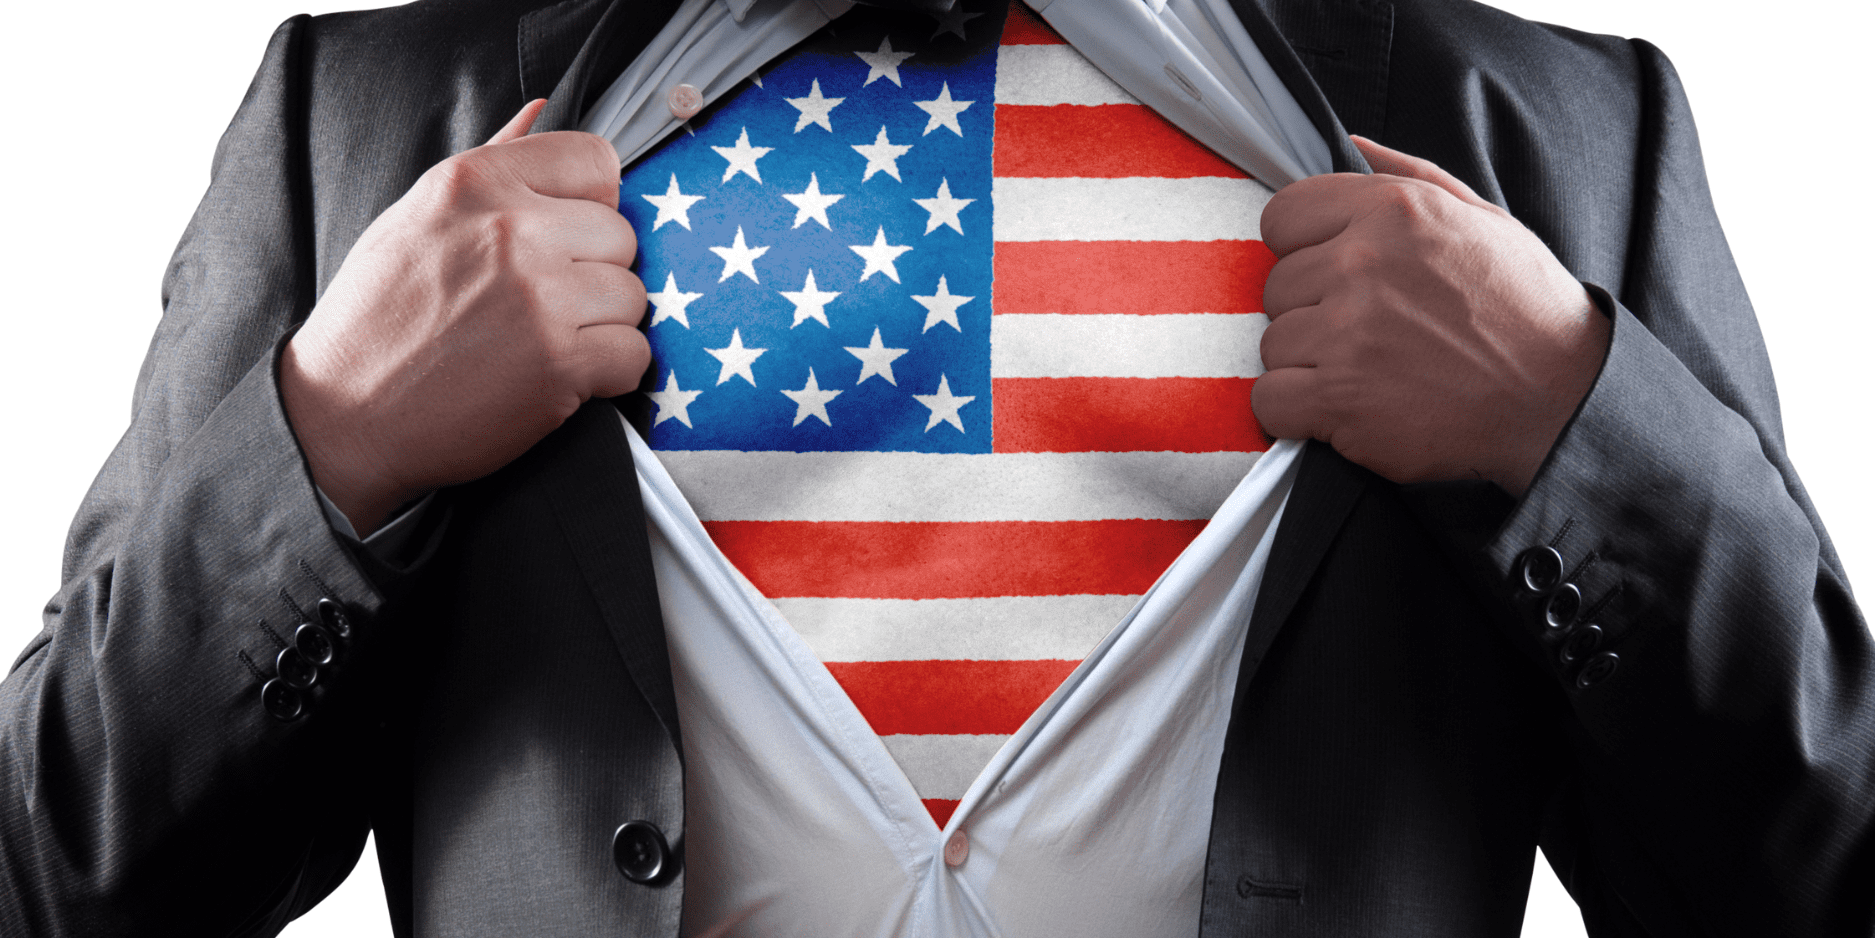 Member Perspectives: What is America’s “Superpower?”